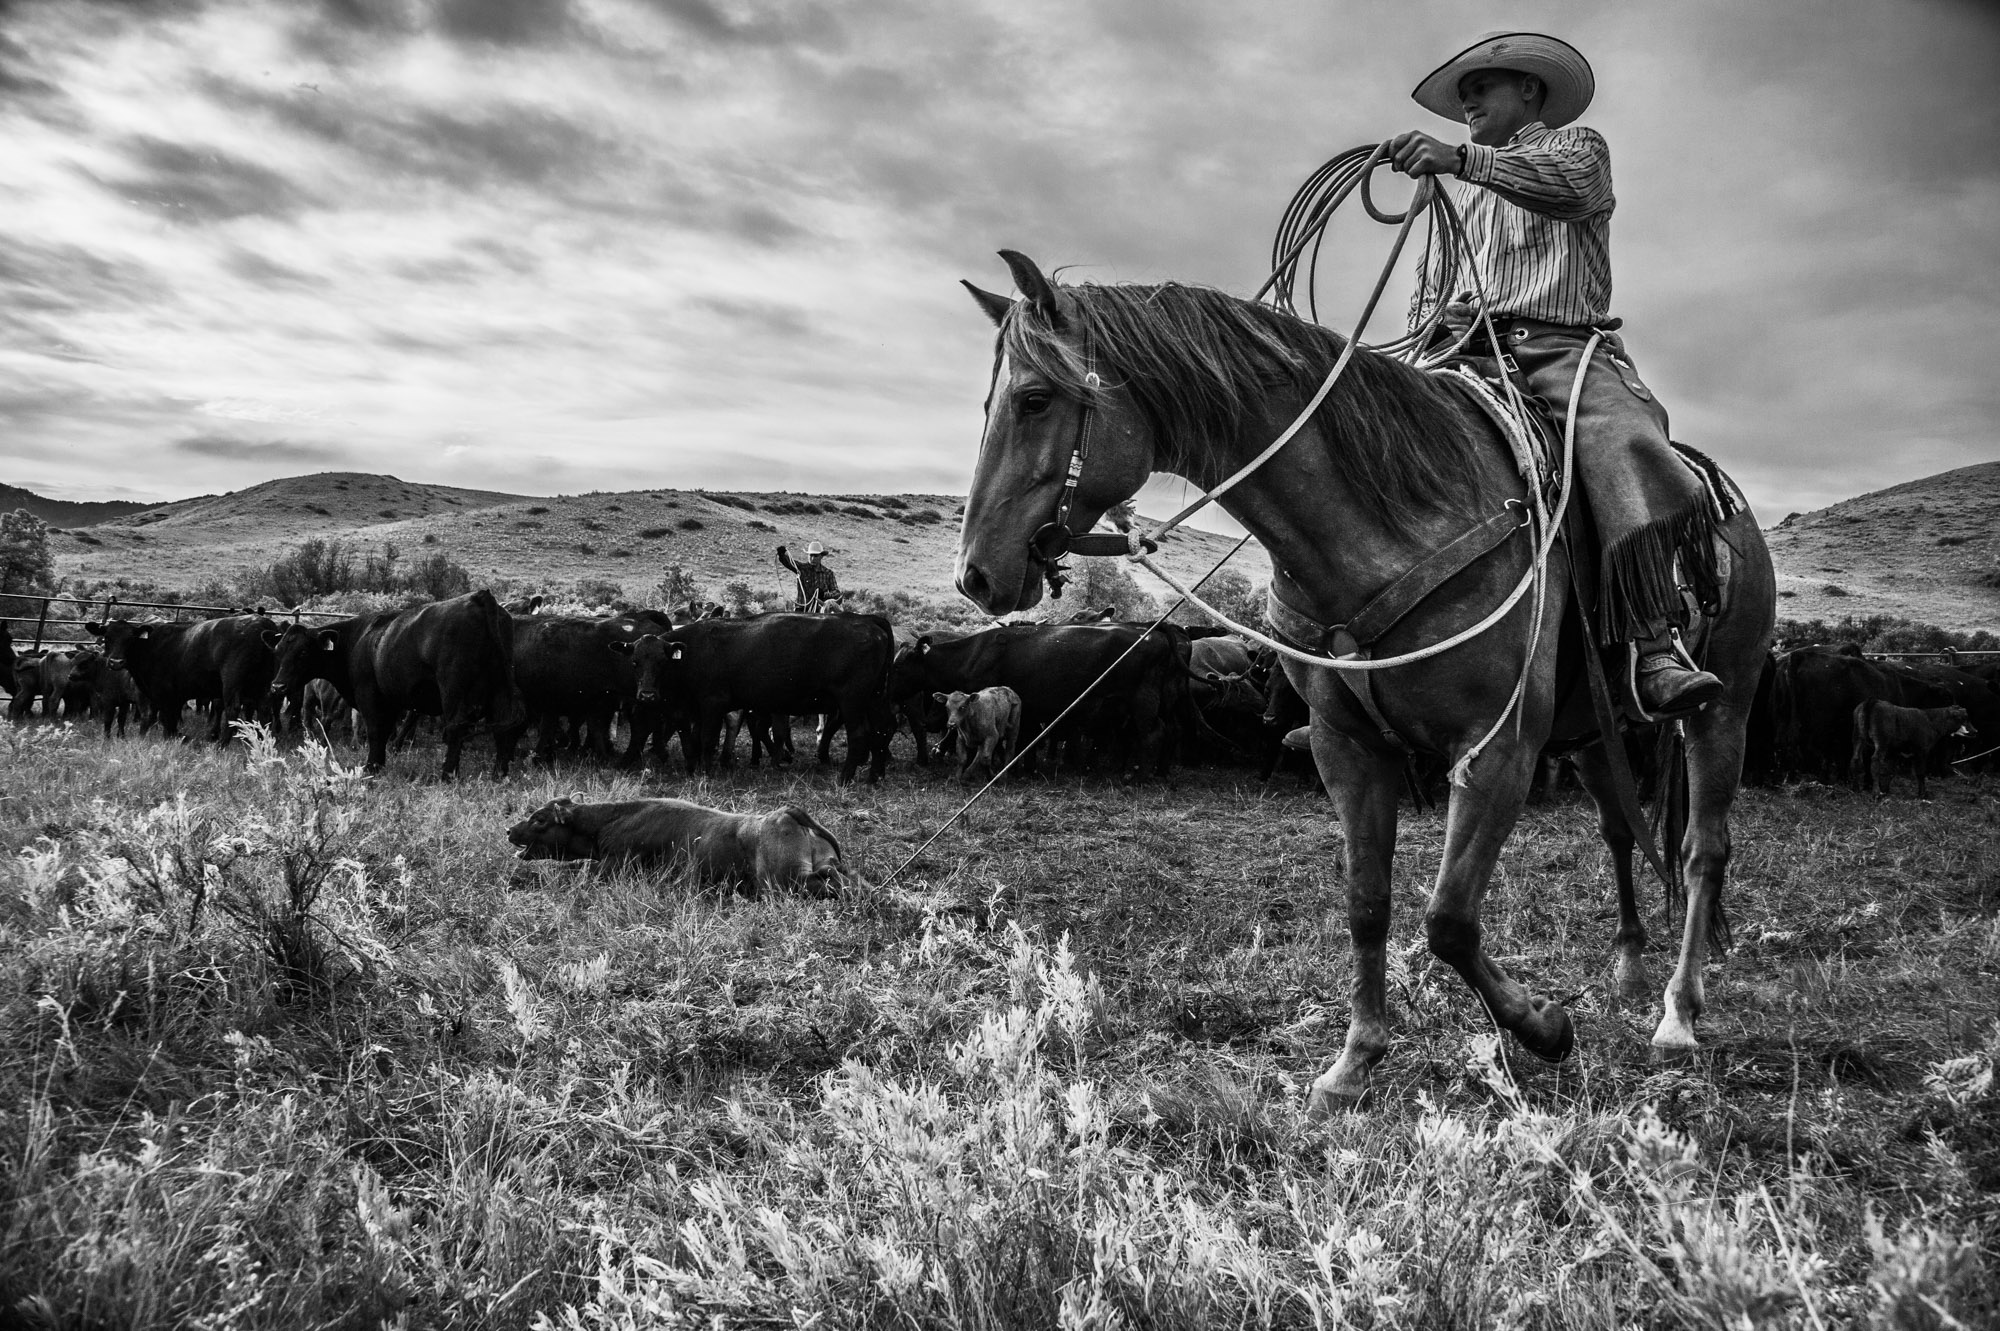 Fine Art Limited Edition Photo Prints of Cowboys, Horses, and life in the West. Waiting. A Cowboy picture in black and white....